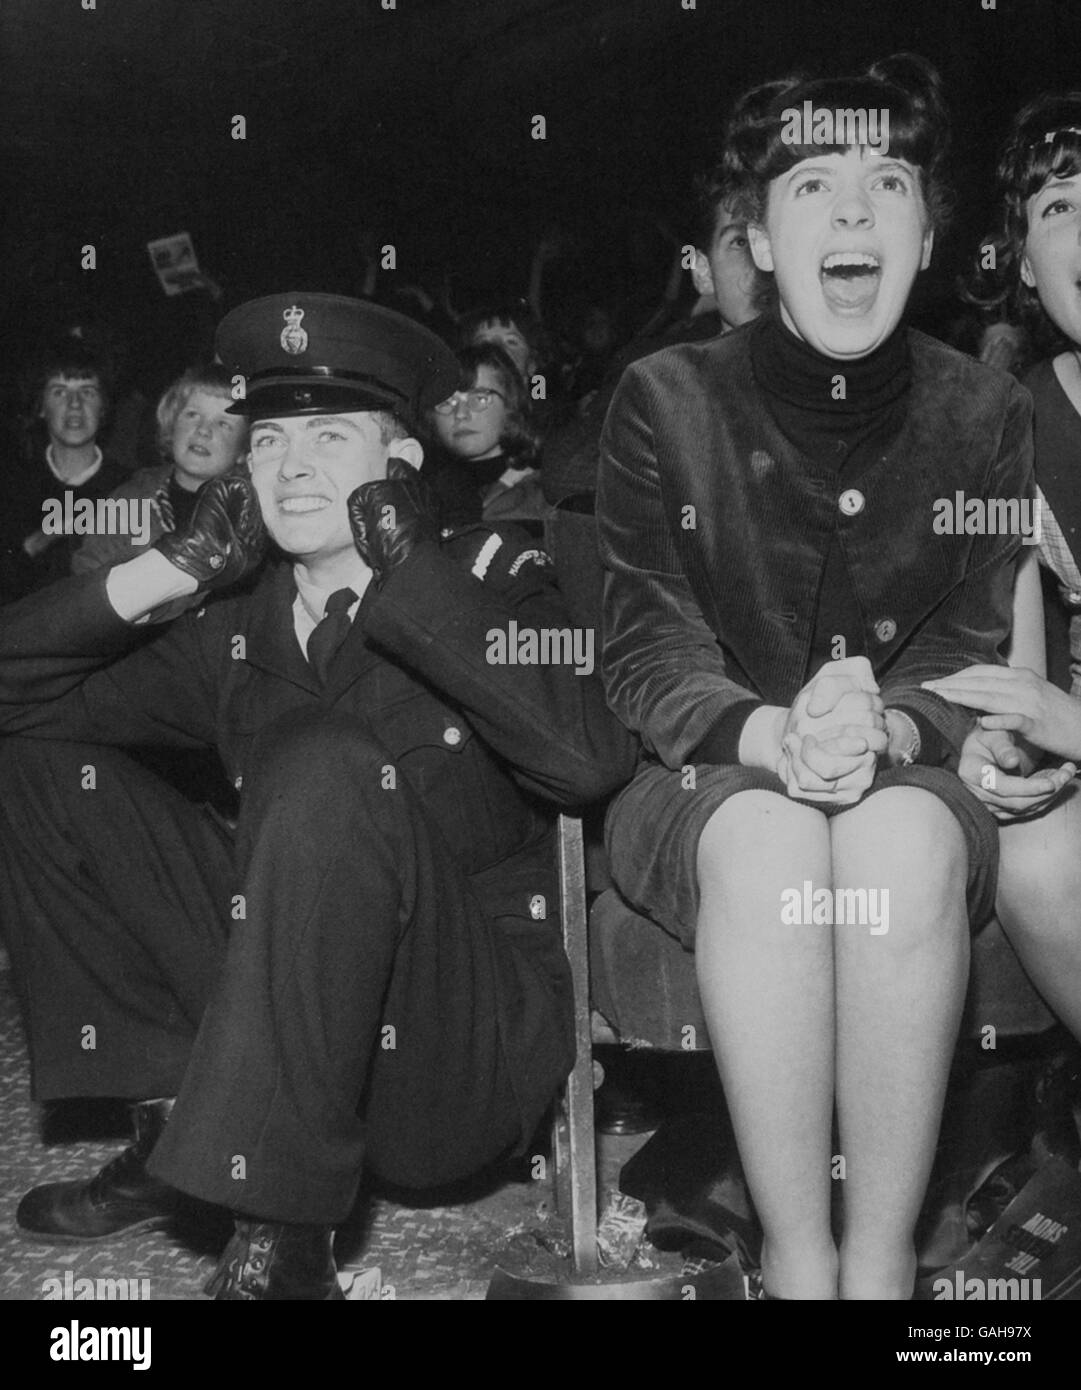 A policeman takes evasive action to block his ears from the screaming fans at the Mersysides group's performance in Manchester Stock Photo